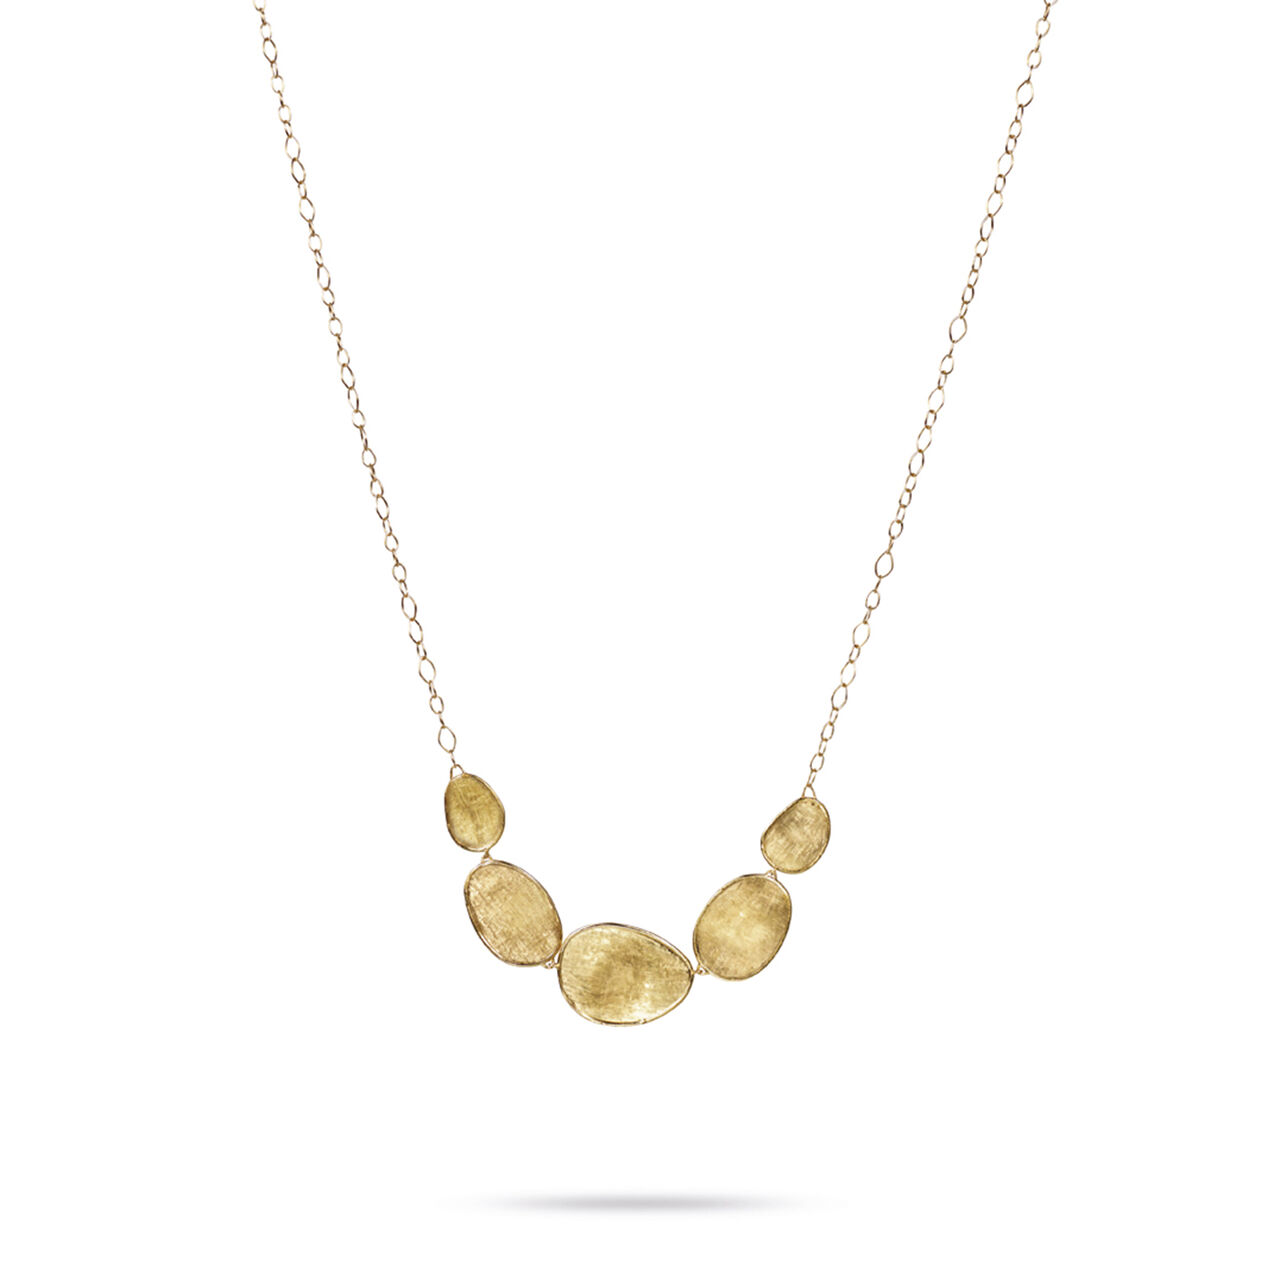 maison birks marco bicego lunaria yellow gold graduated necklace cb1779 y 02 image number 0